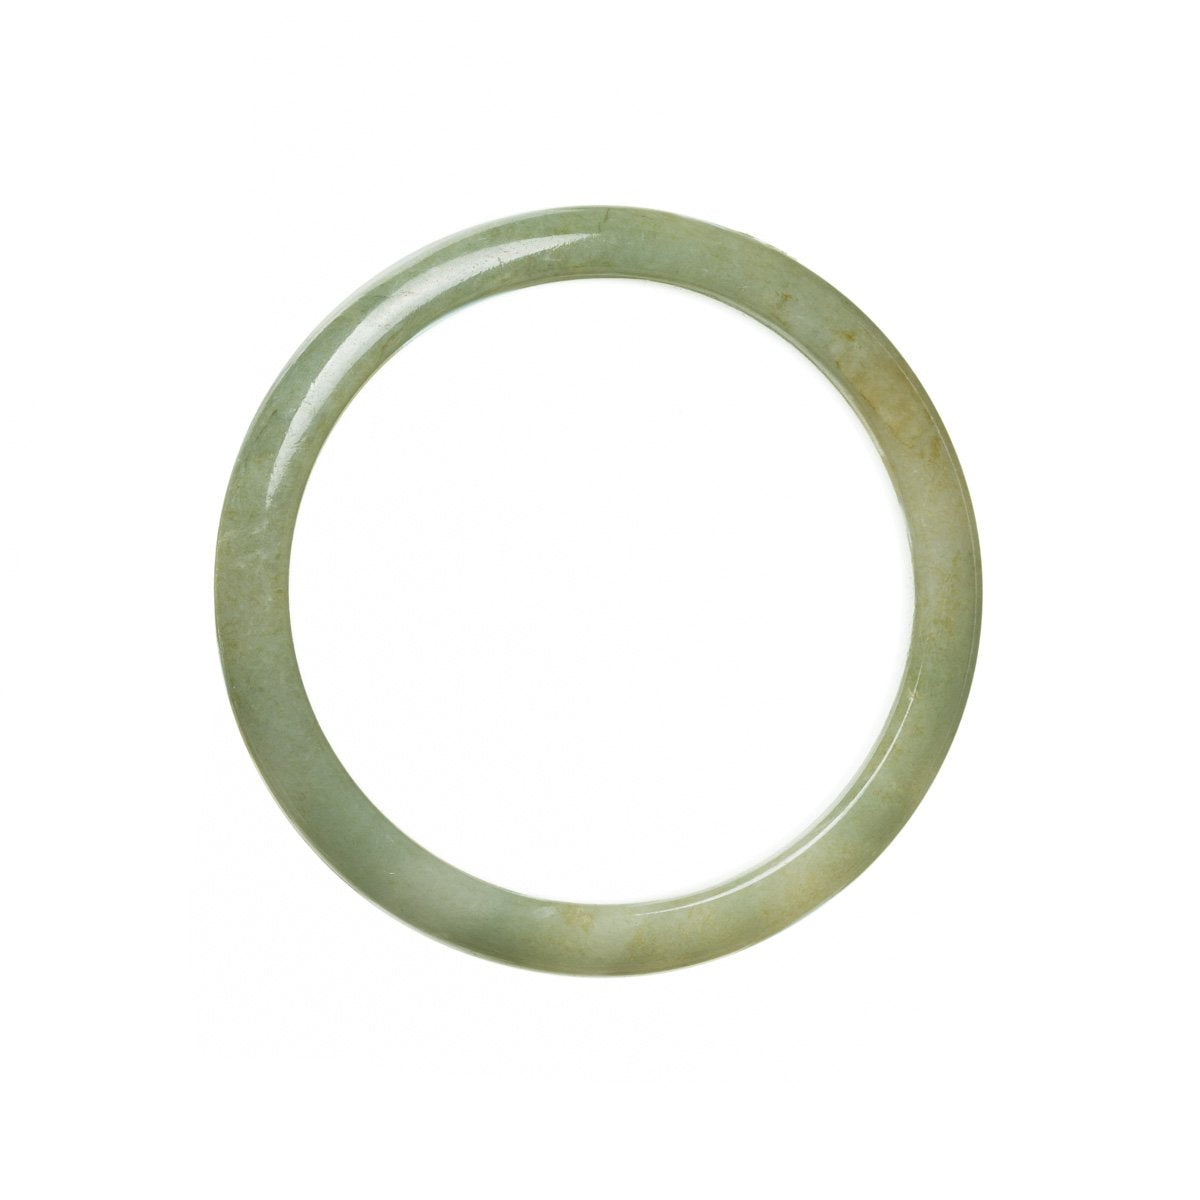 A close-up image of a beautiful brownish green Burma jade bangle, featuring a semi-round shape and measuring 56mm in diameter. This high-quality, genuine Grade A jade bangle is a stunning accessory for any occasion.